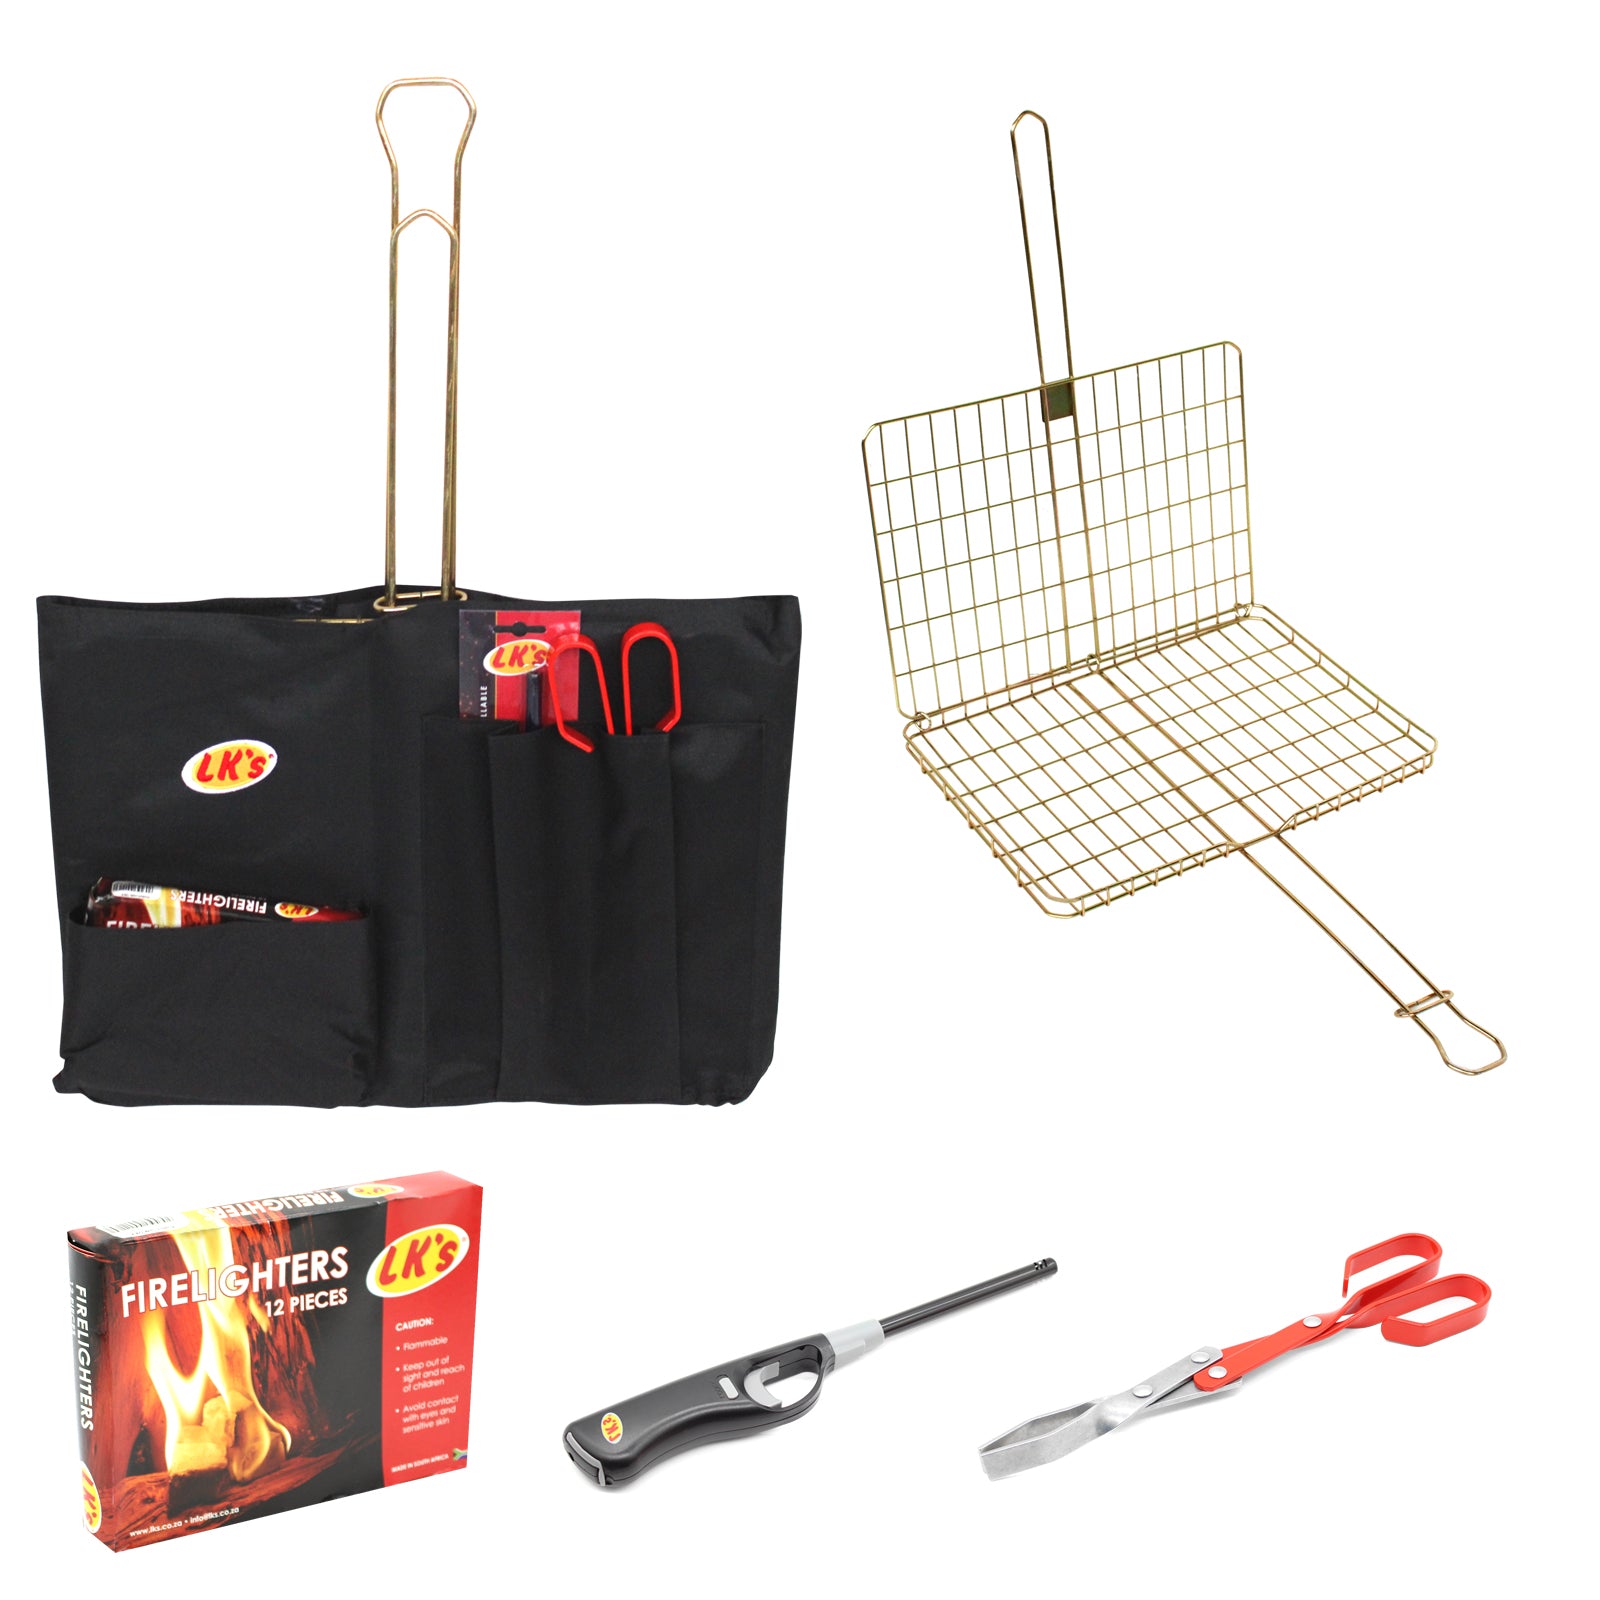 Braai Set with Grid, Lighter, Tongs and Fire Lighters